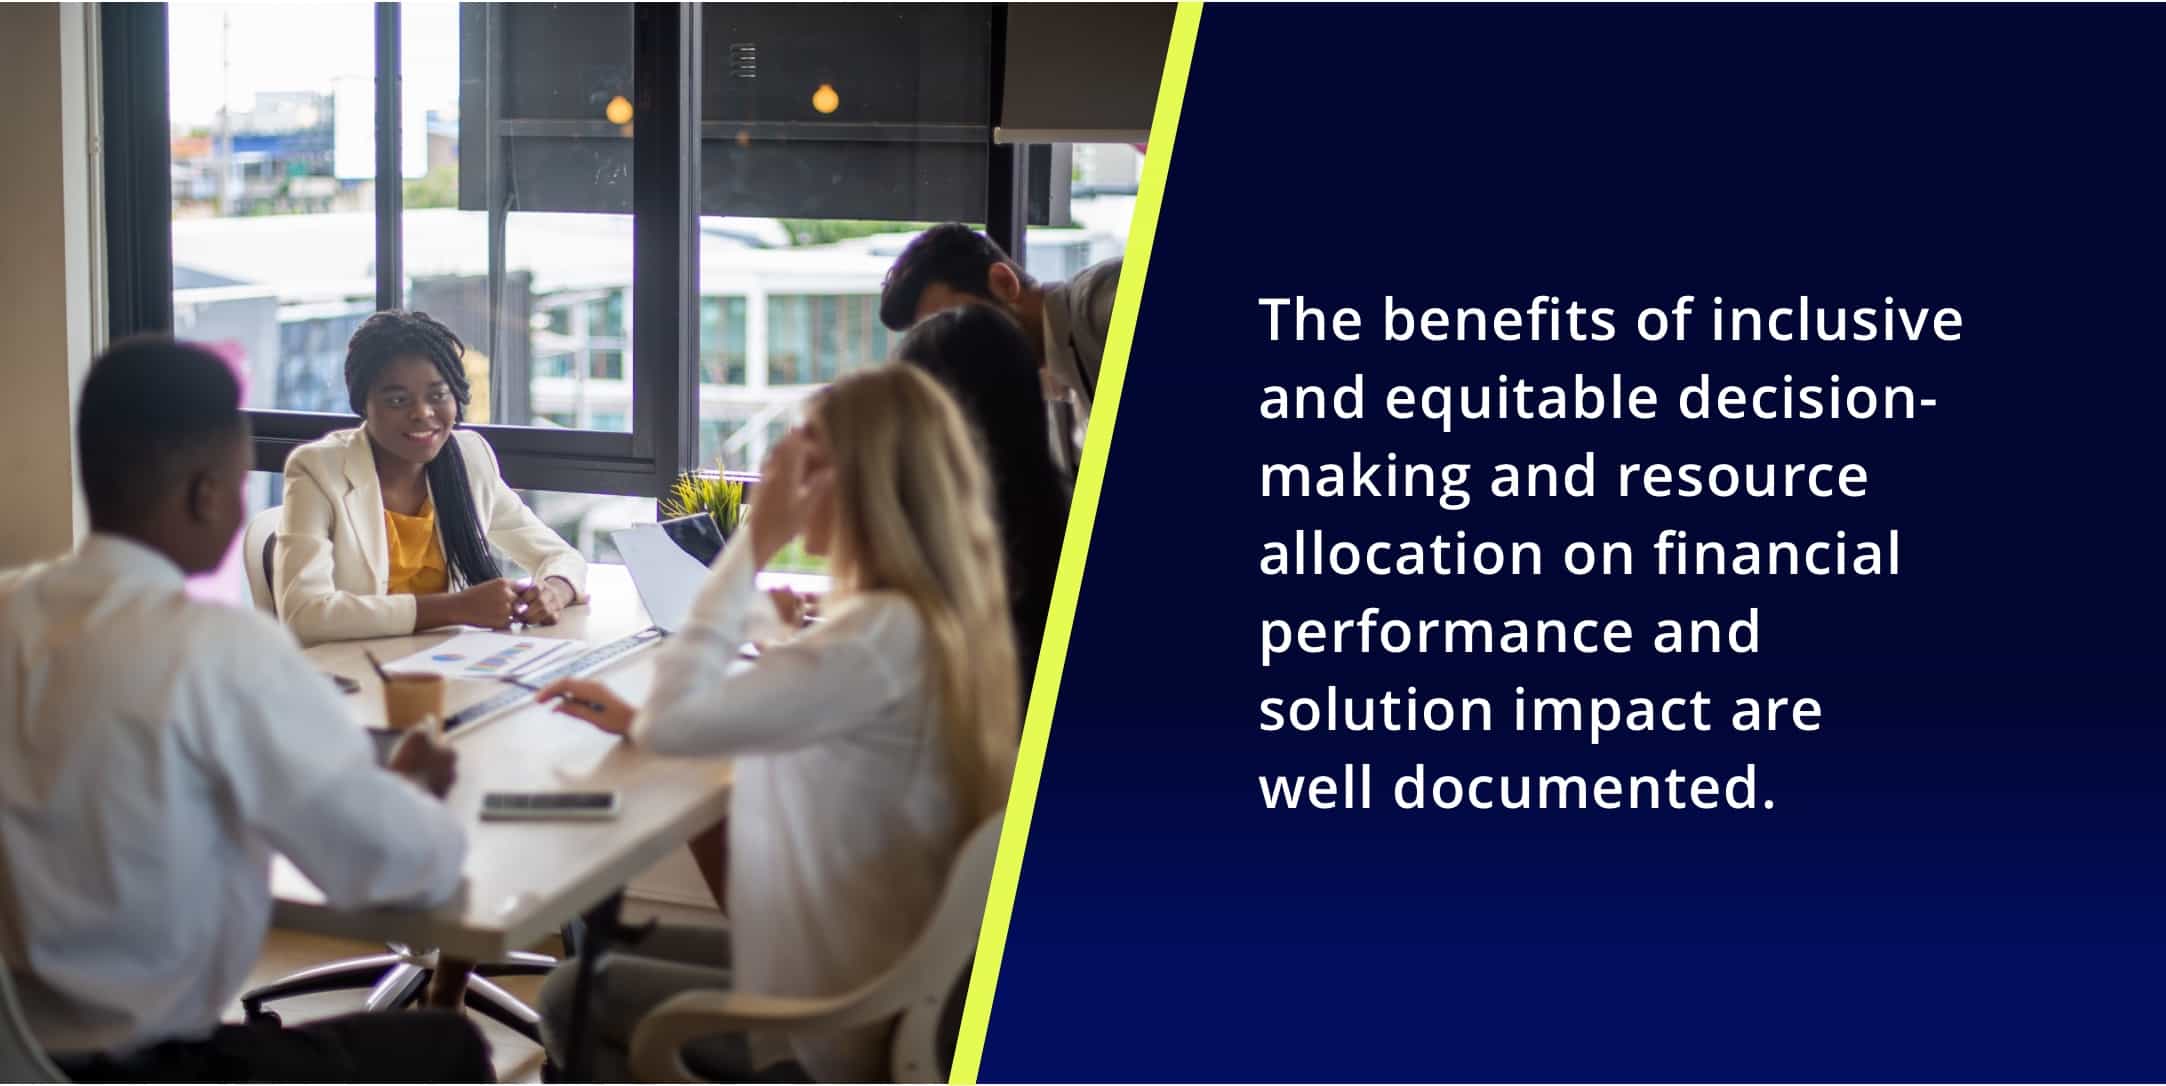 The benefits of inclusive and equitable decision-making and resource allocation on financial performance and solution impact are well documented.